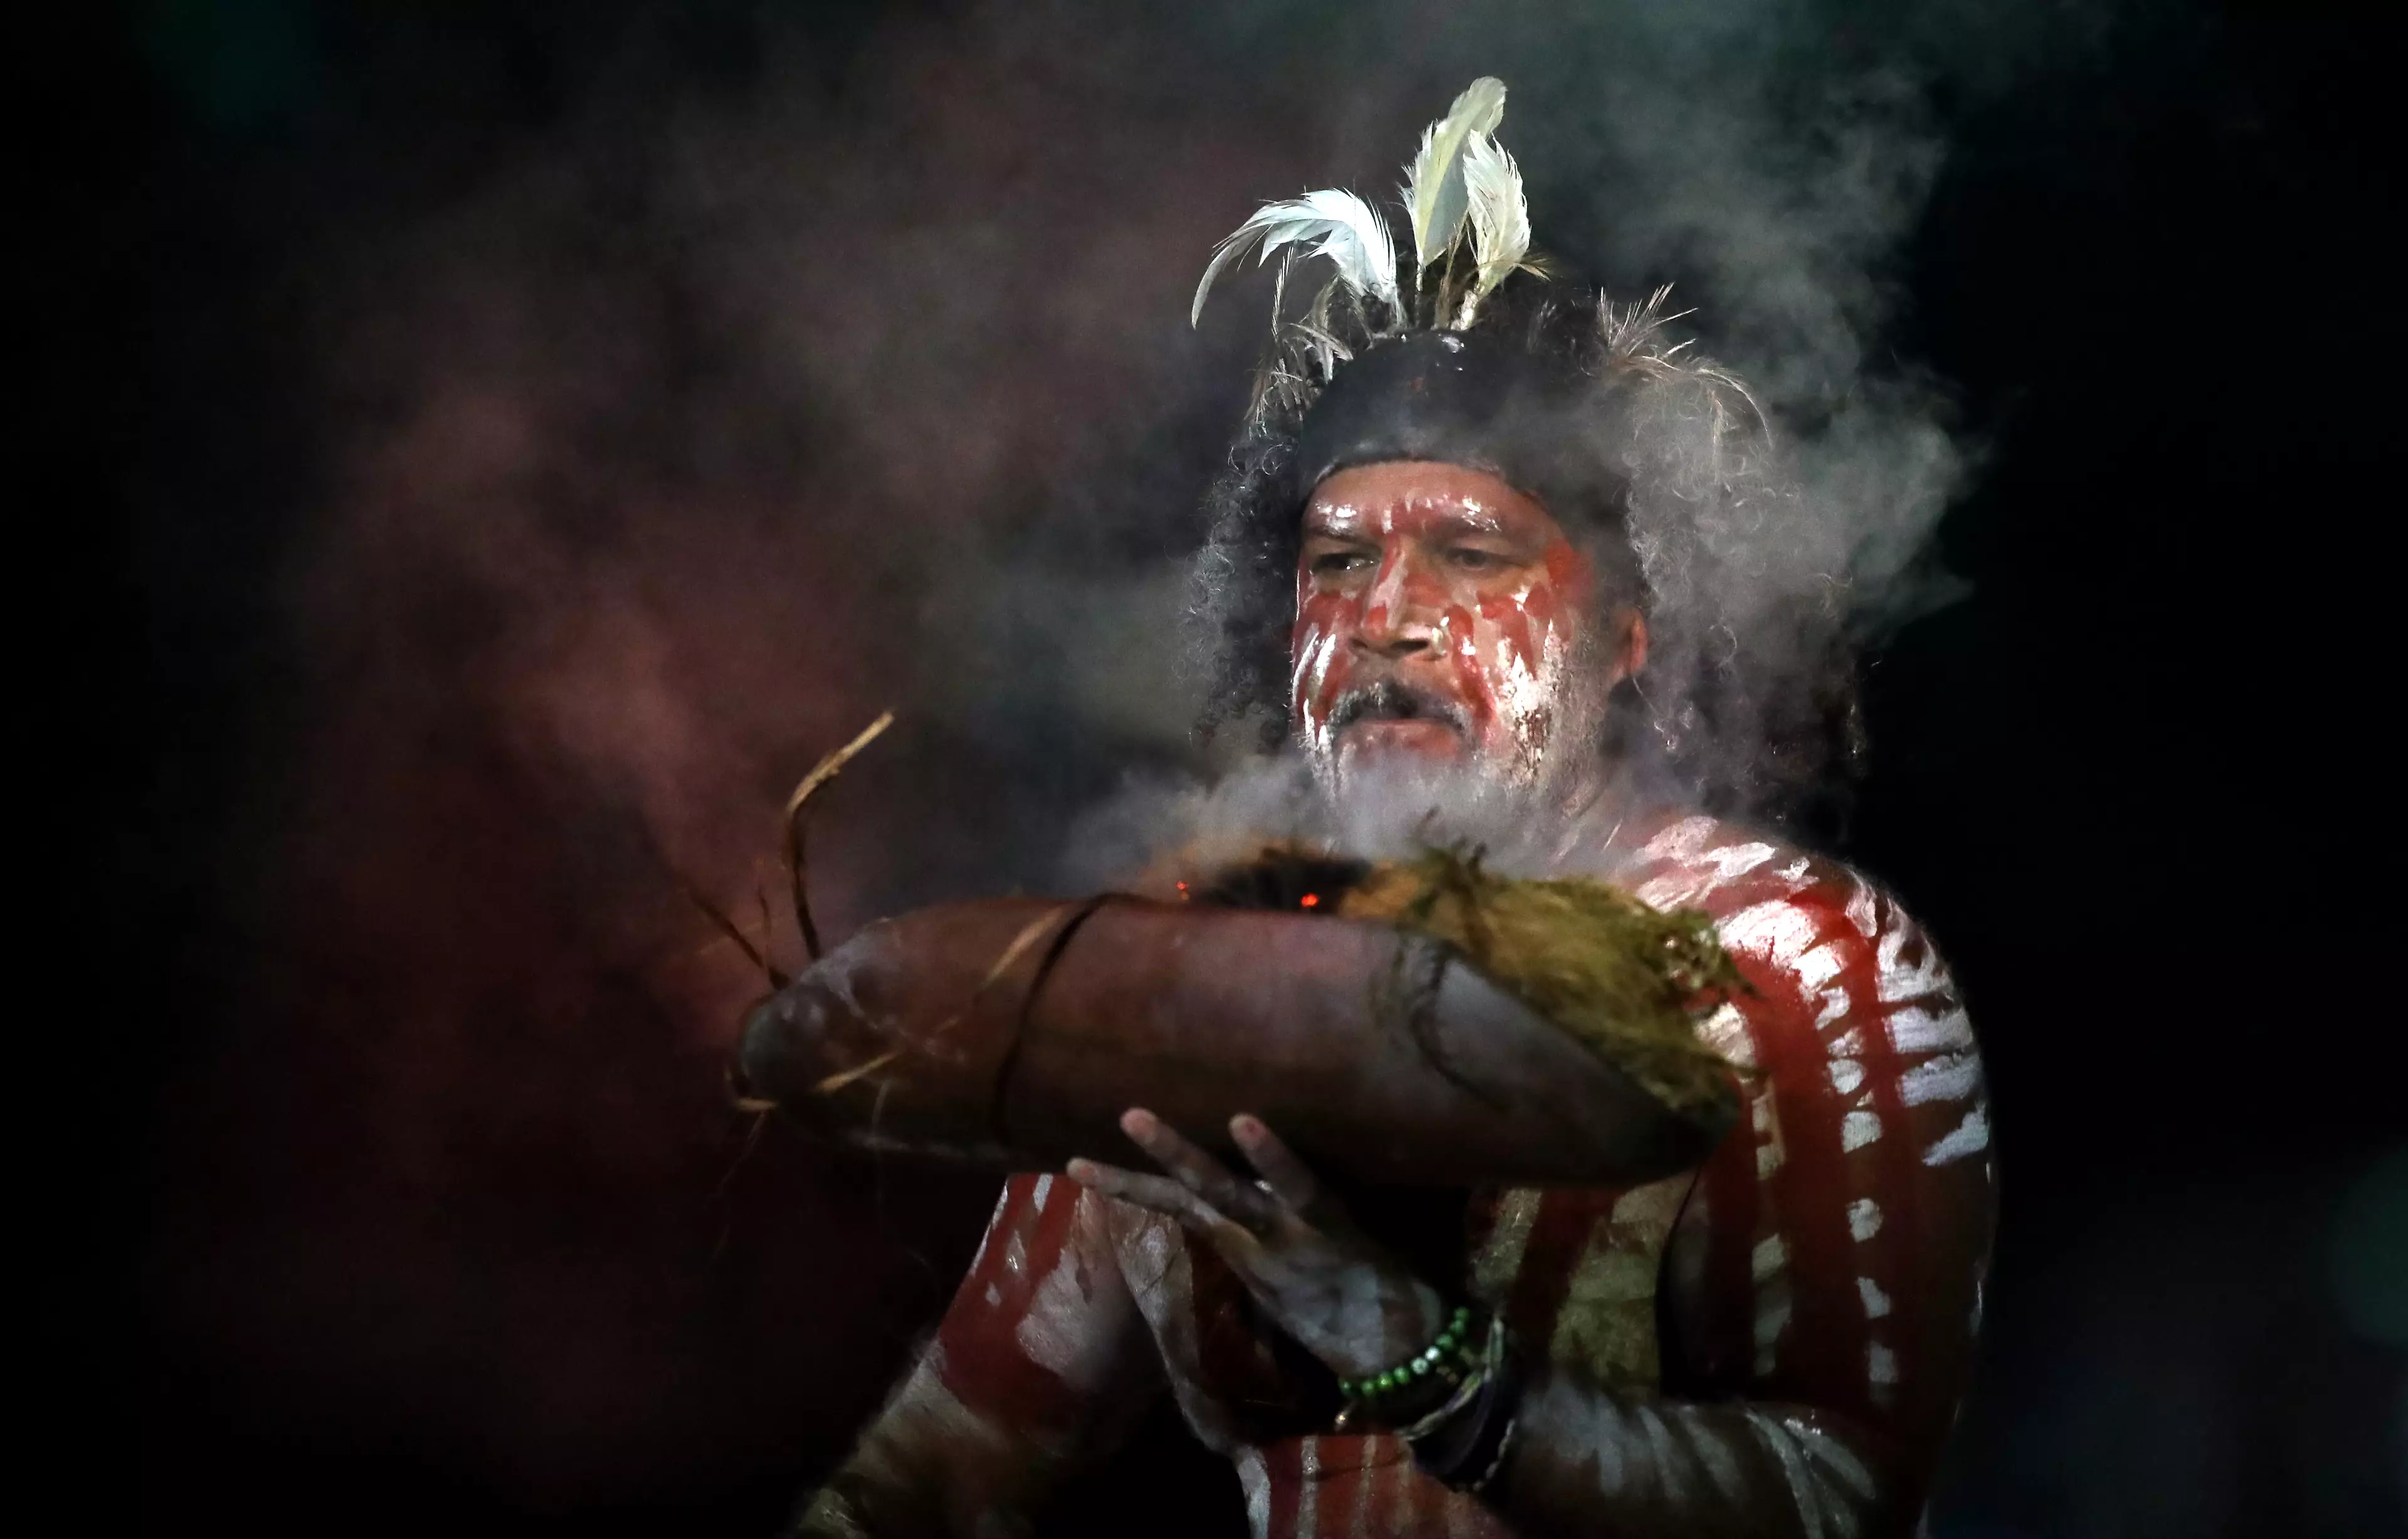 An Indigenous performer during the opening ceremony of the Gold Coast 2018 Commonwealth Games.